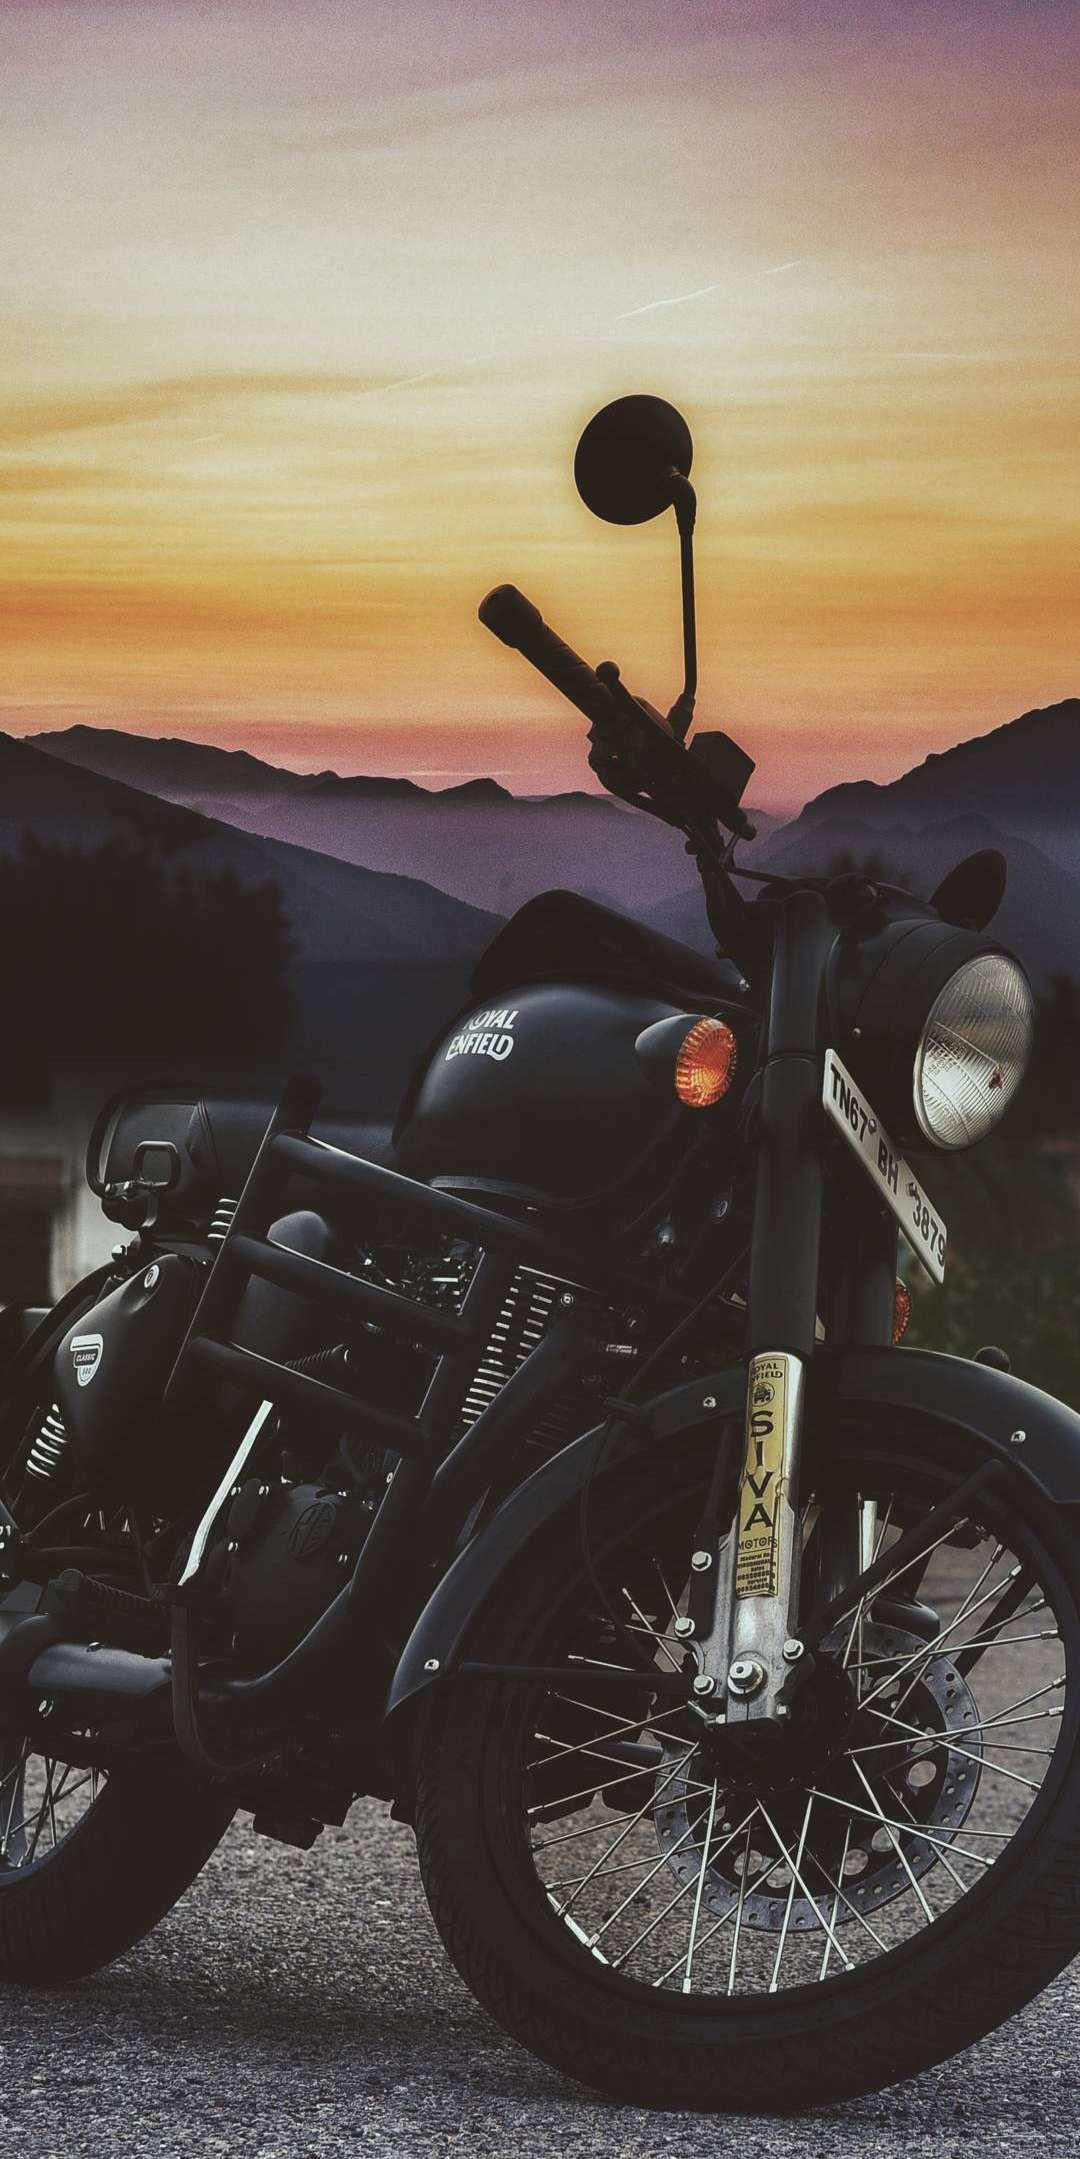 yasholo iPhone Wallpaper for iPhone iPhone 8 Plus, iPho. Royal enfield wallpaper, Royal enfield HD wallpaper, Bullet bike royal enfield